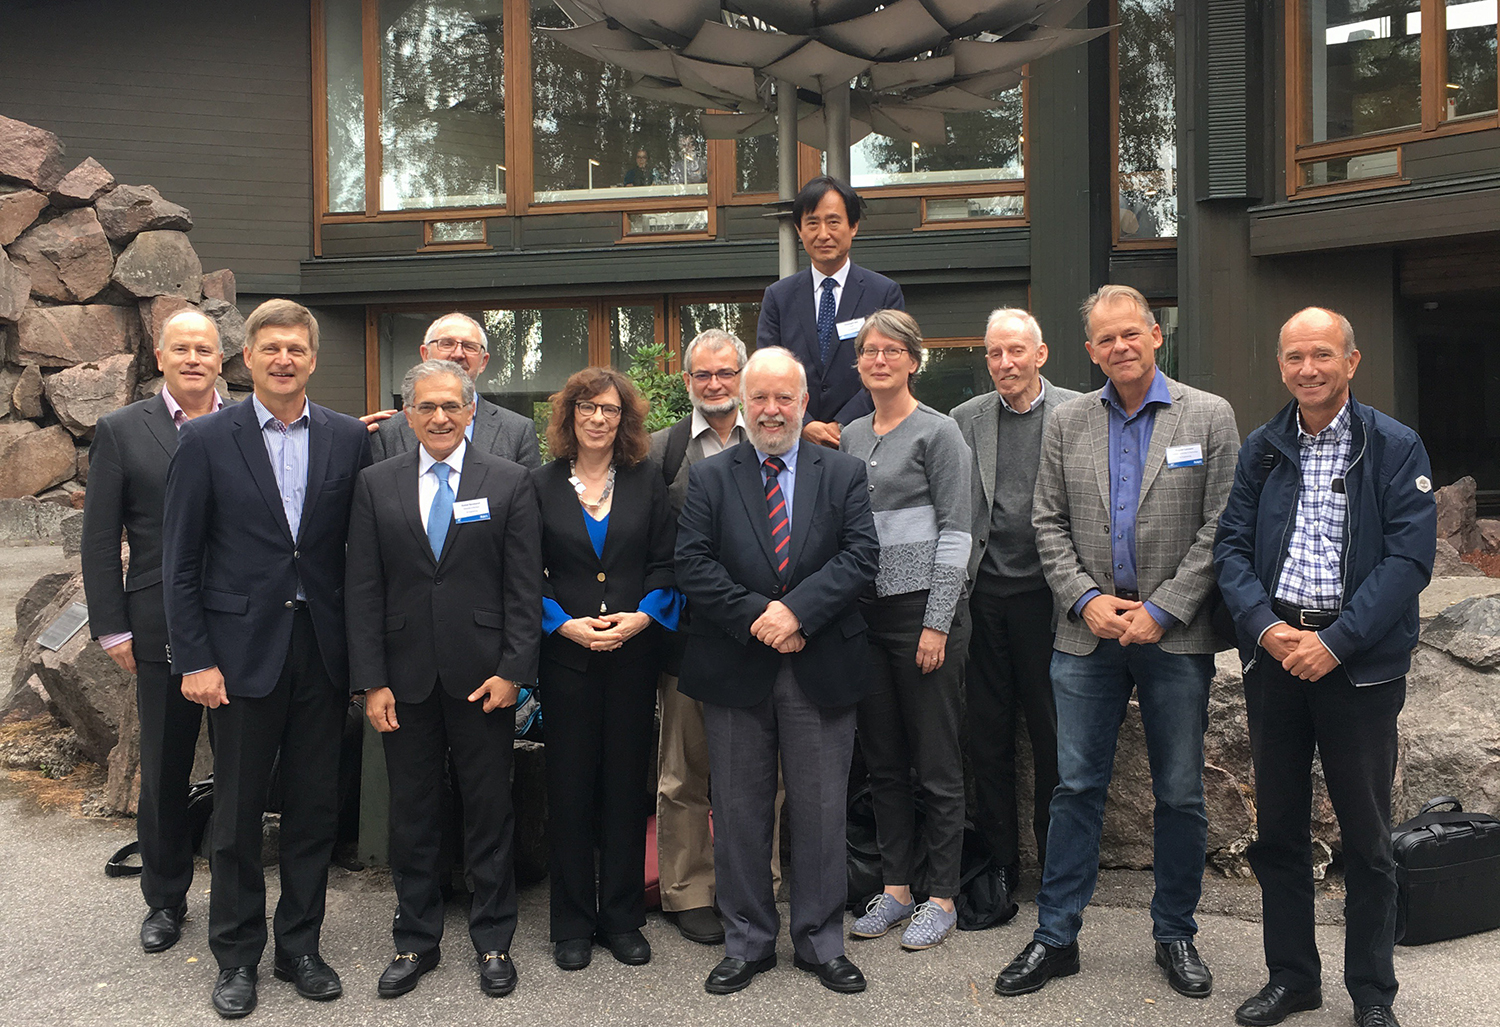 Professor Sarabandi (3rd from the right) chaired a panel to review and assess Research, Art, and Impact at Aalto University in Finland. To his right are University President Ilkka Niemela and Dean of Engineering Gary Marquis.